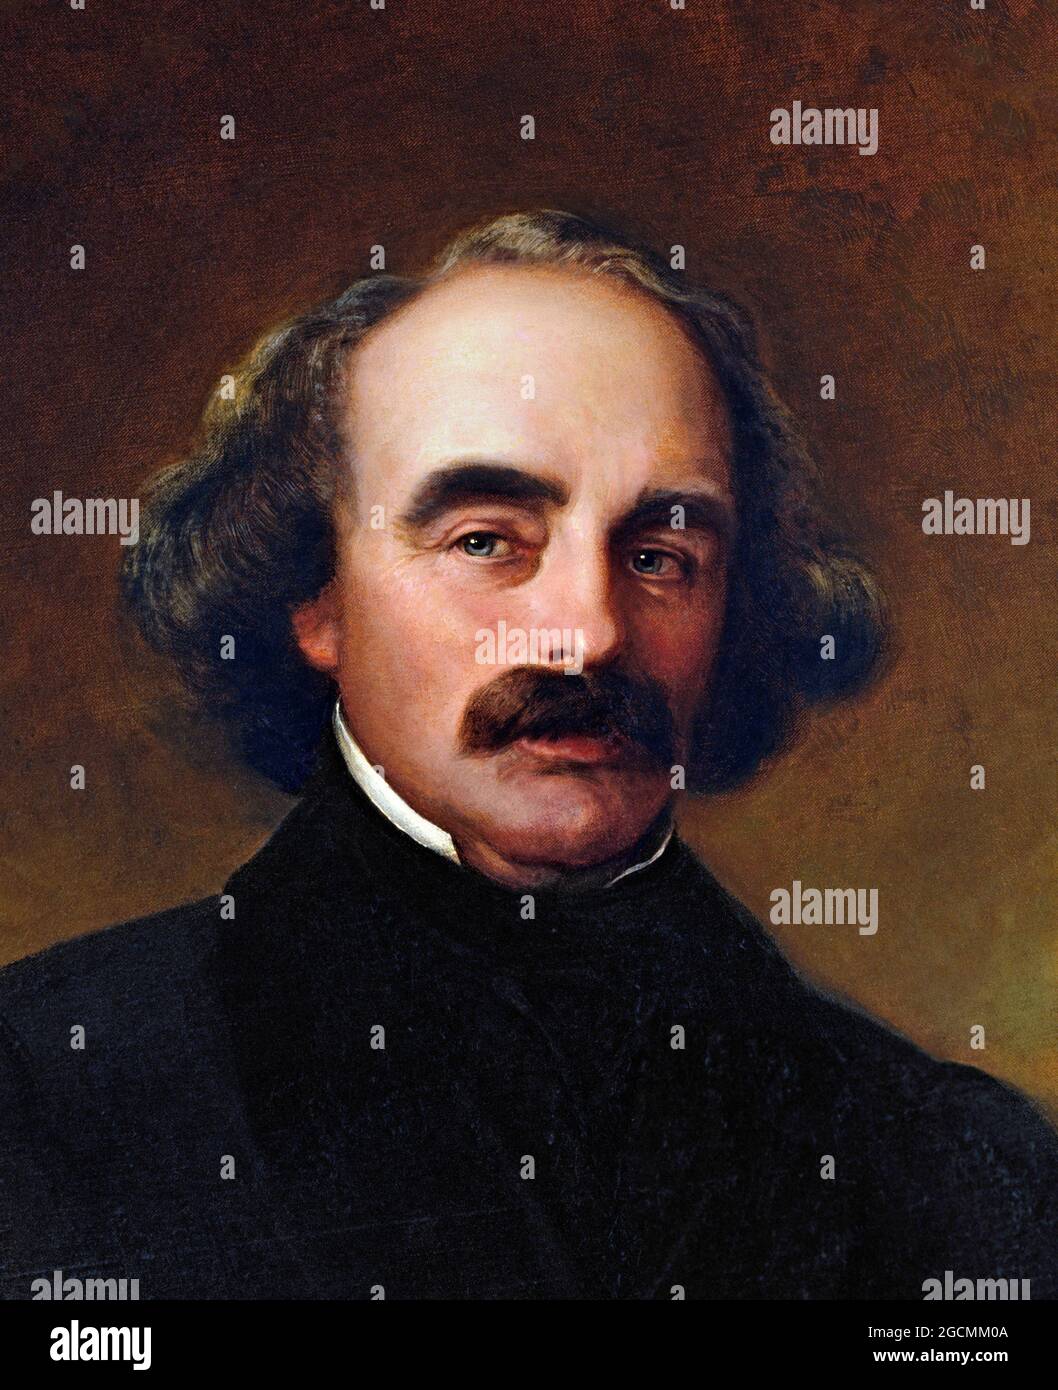 Portrait of the American writer, Nathaniel Hawthorne (1804-1864) by Emanuel Leutze, oil on canvas, 1862 Stock Photo